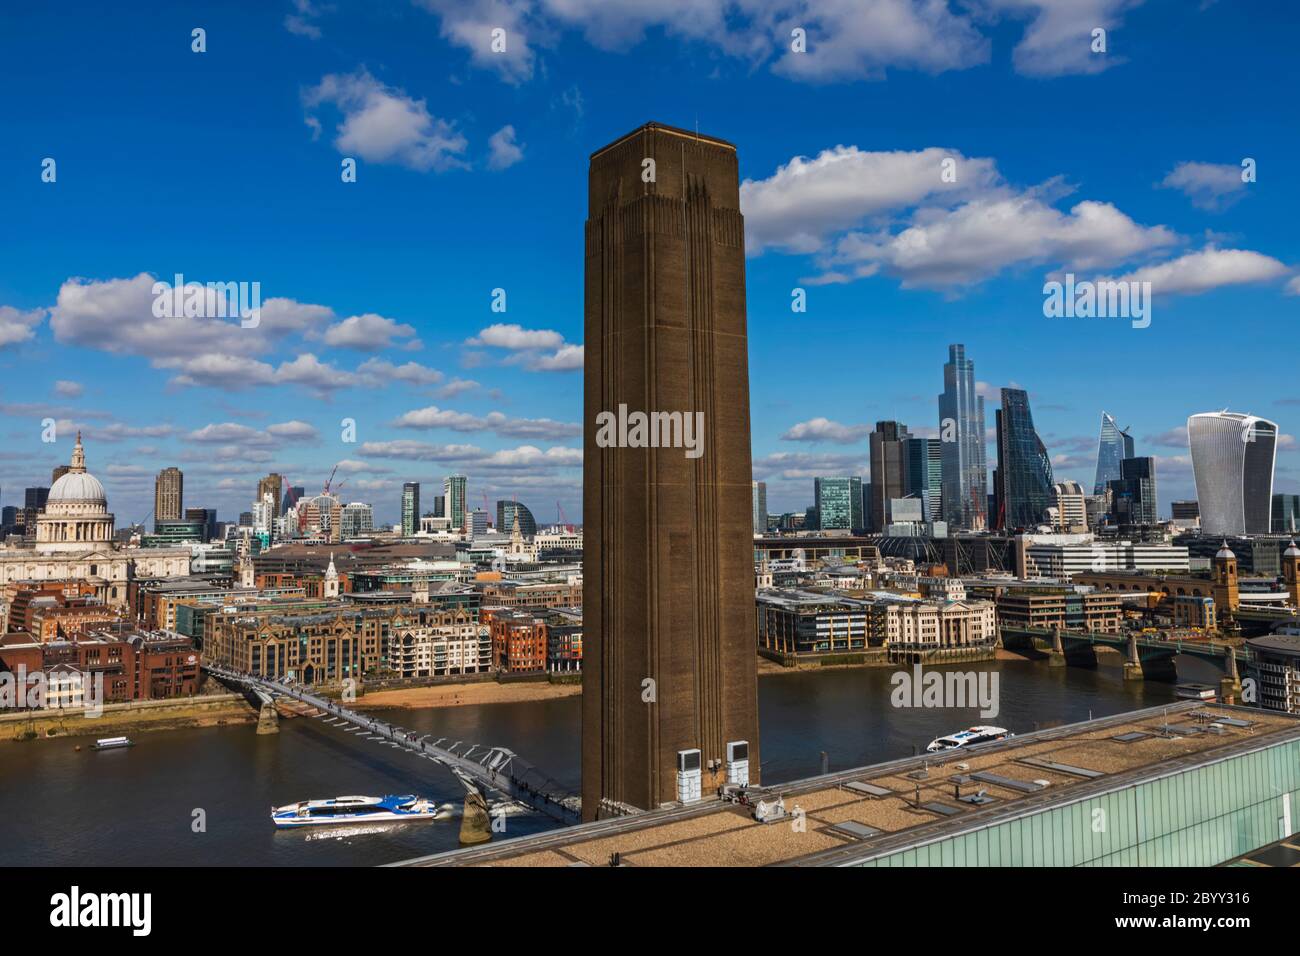 England, London, City of London Skyline and River Thames, View from The Tate Modern Stock Photo